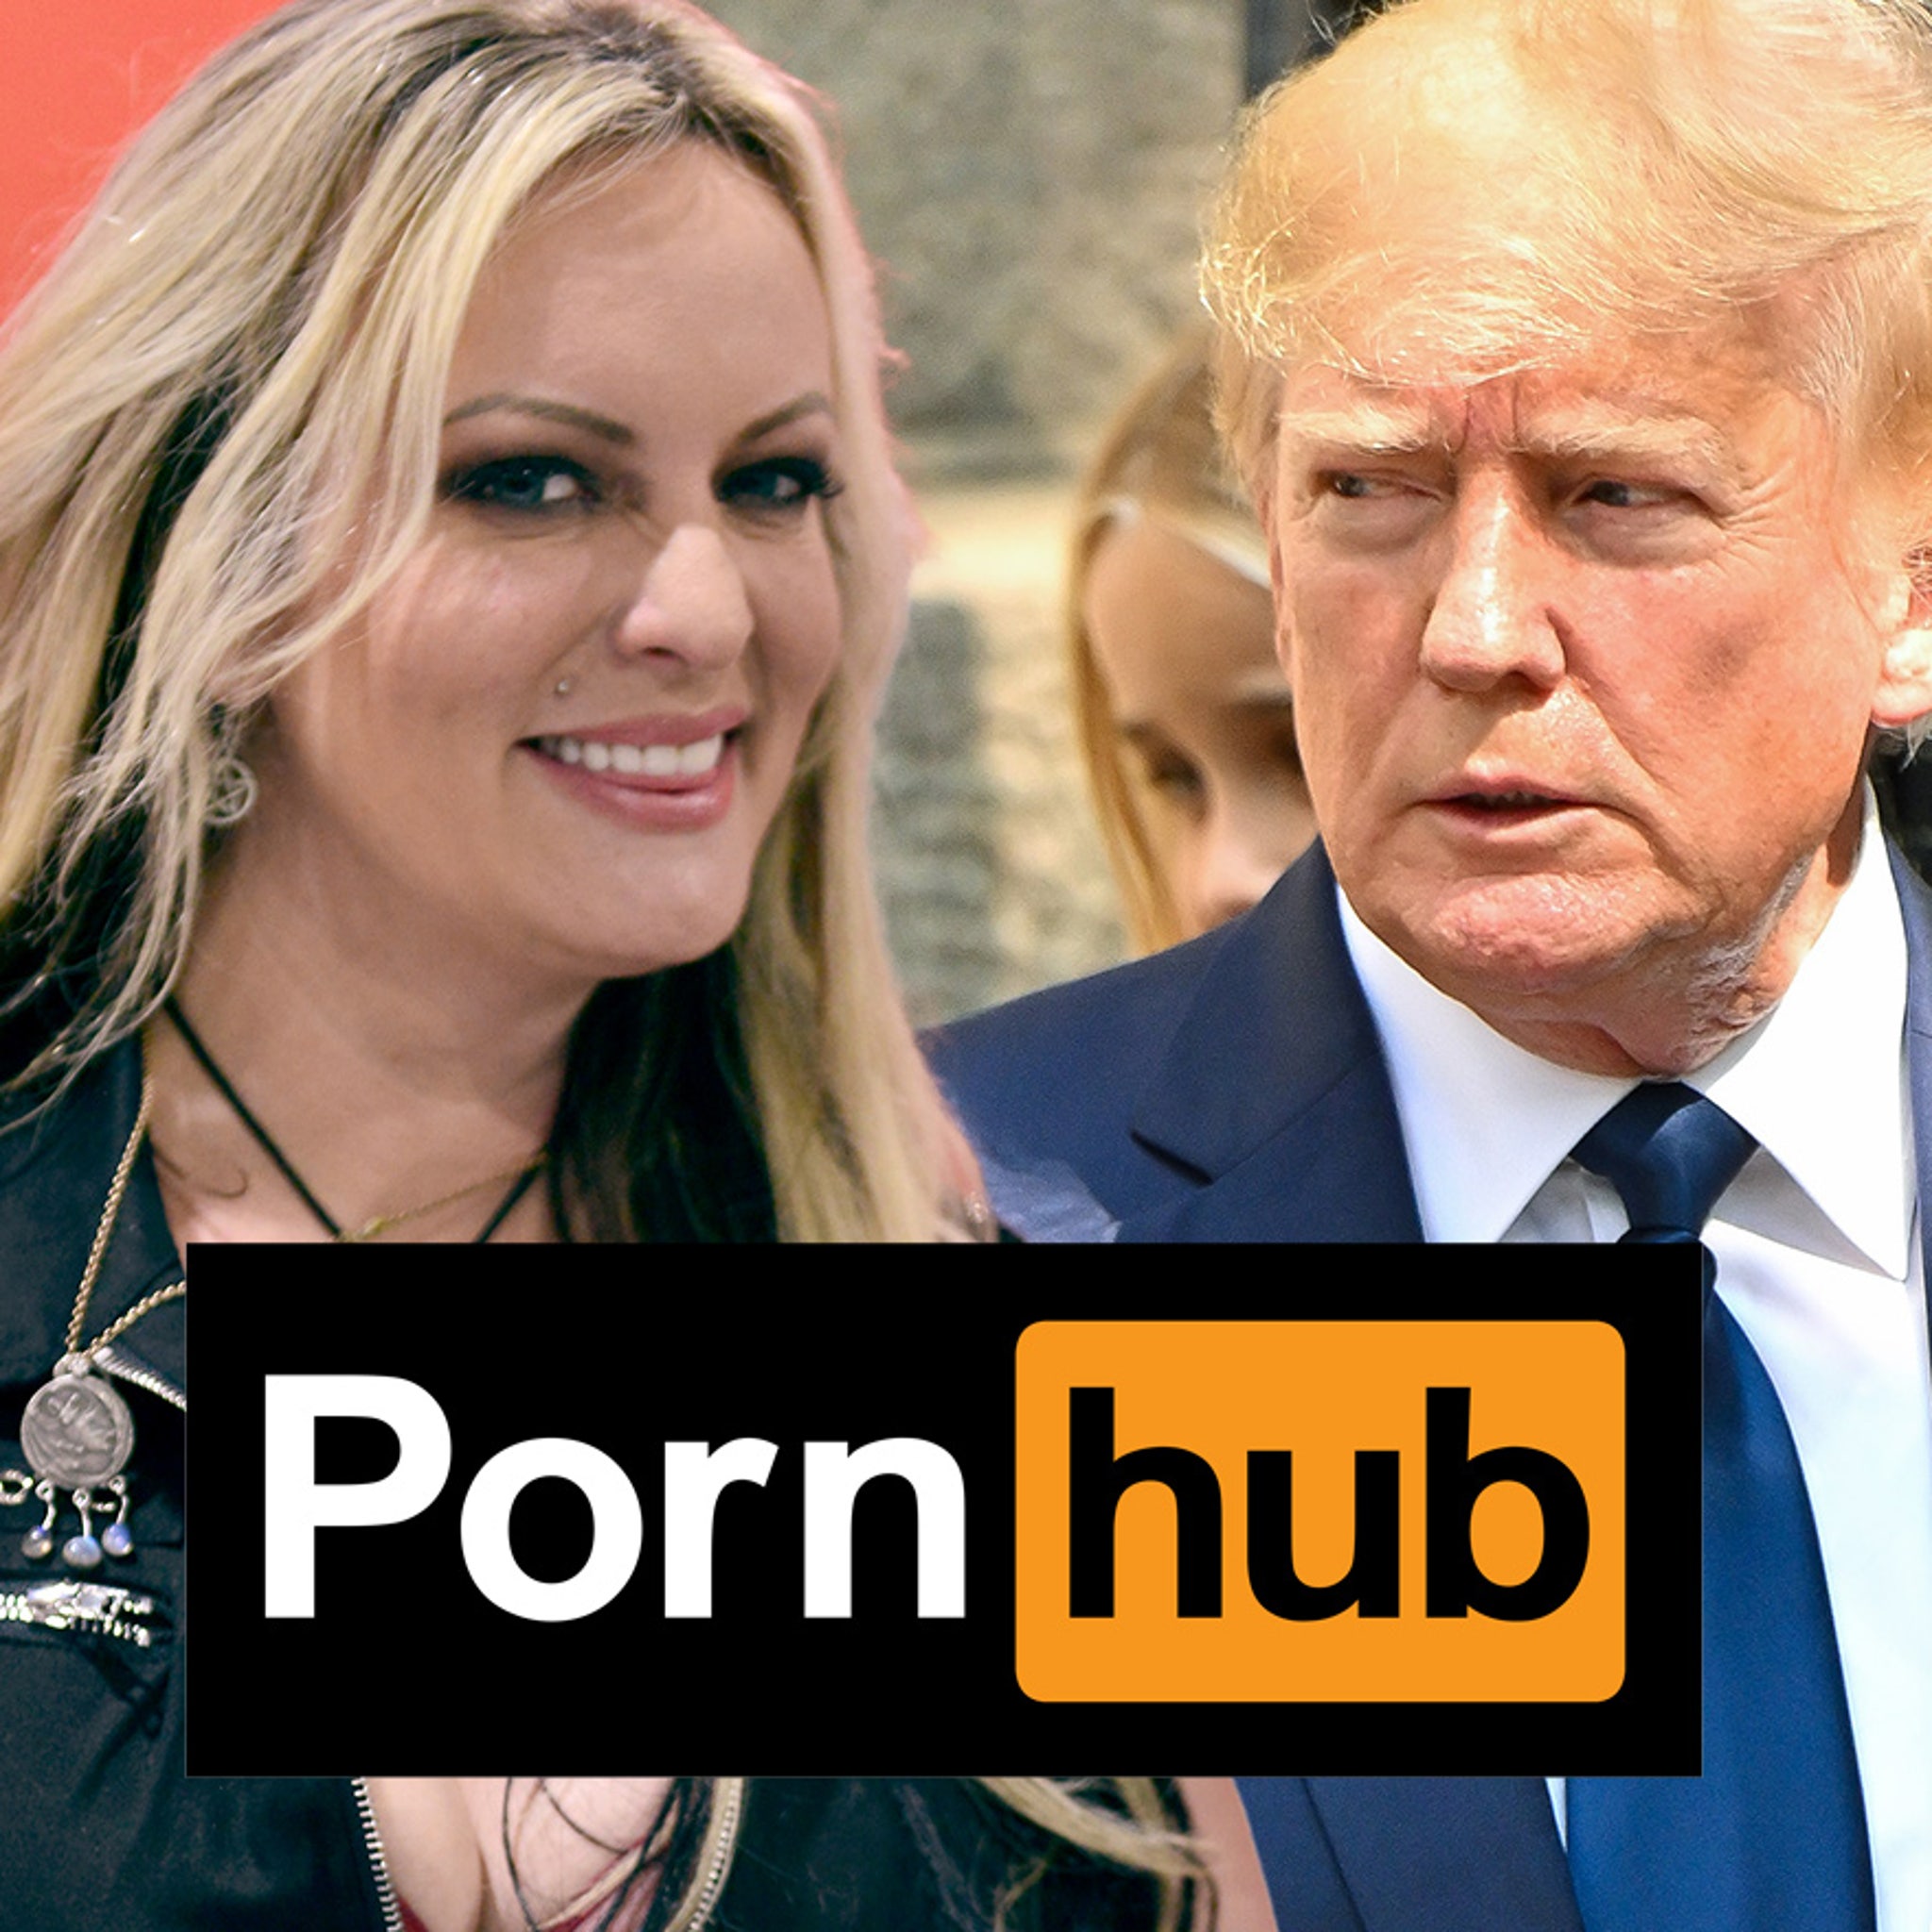 Stormy Daniels Hd Sex Videos Down Loading - Stormy Daniels Pornhub Searches Reach All-Time High On Day Donald Trump  Arrested